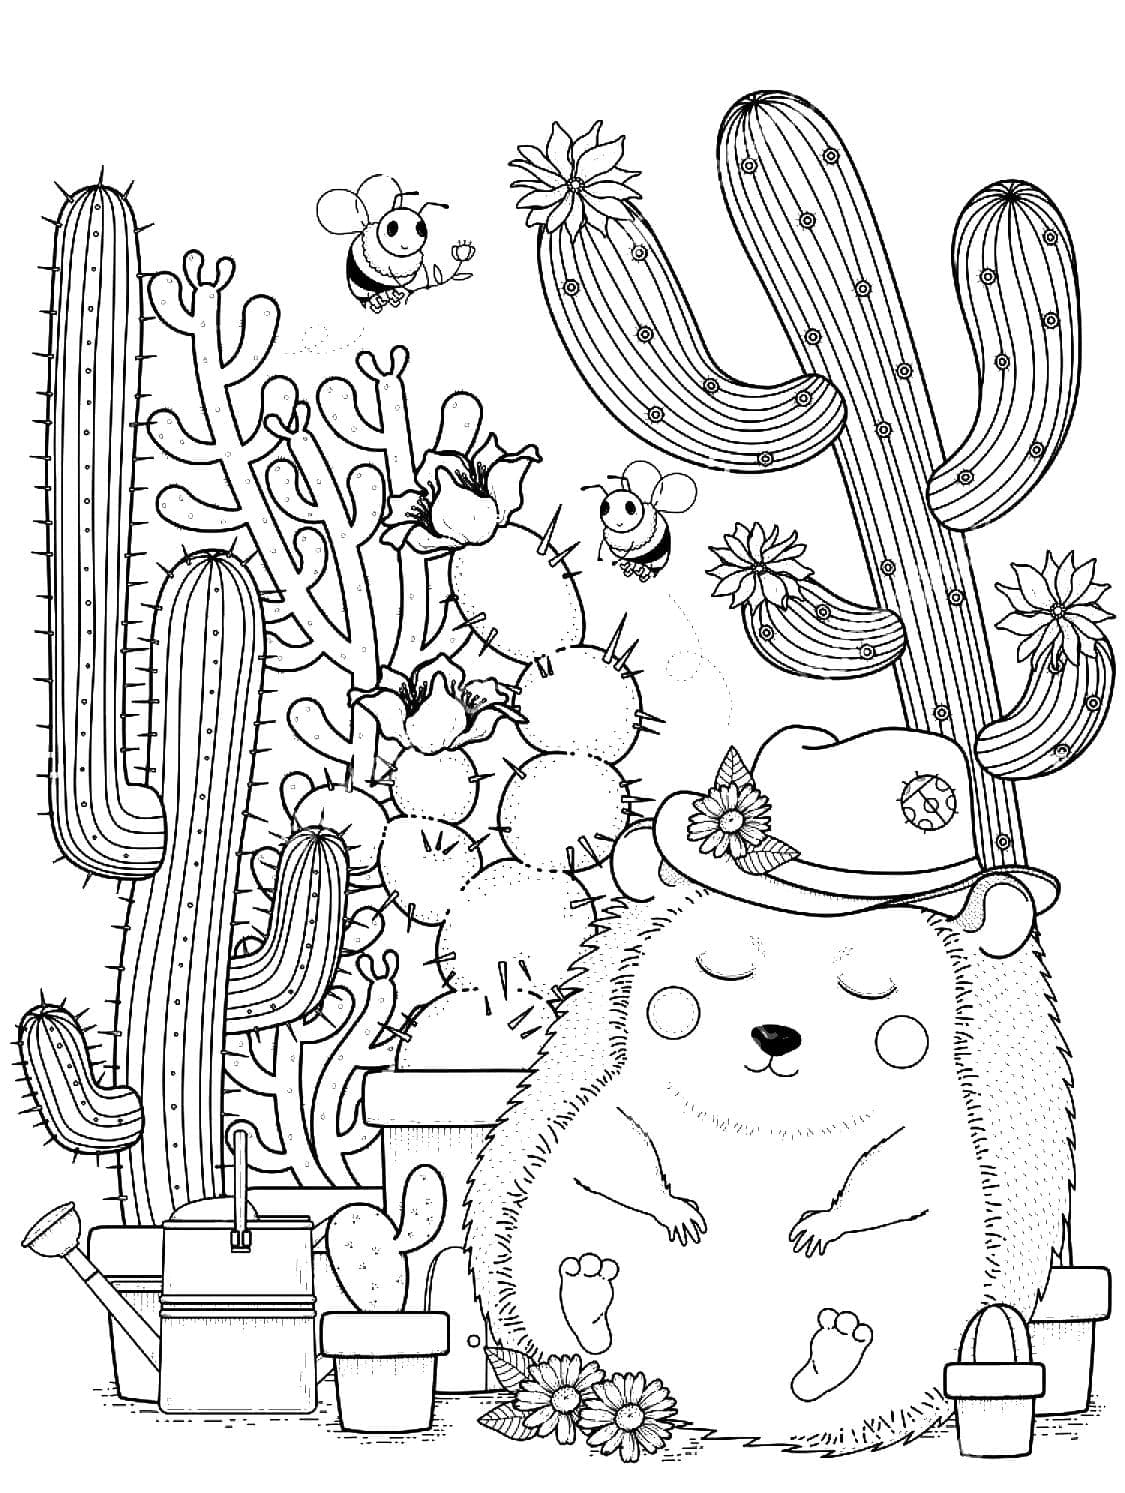 Cactus coloring pages